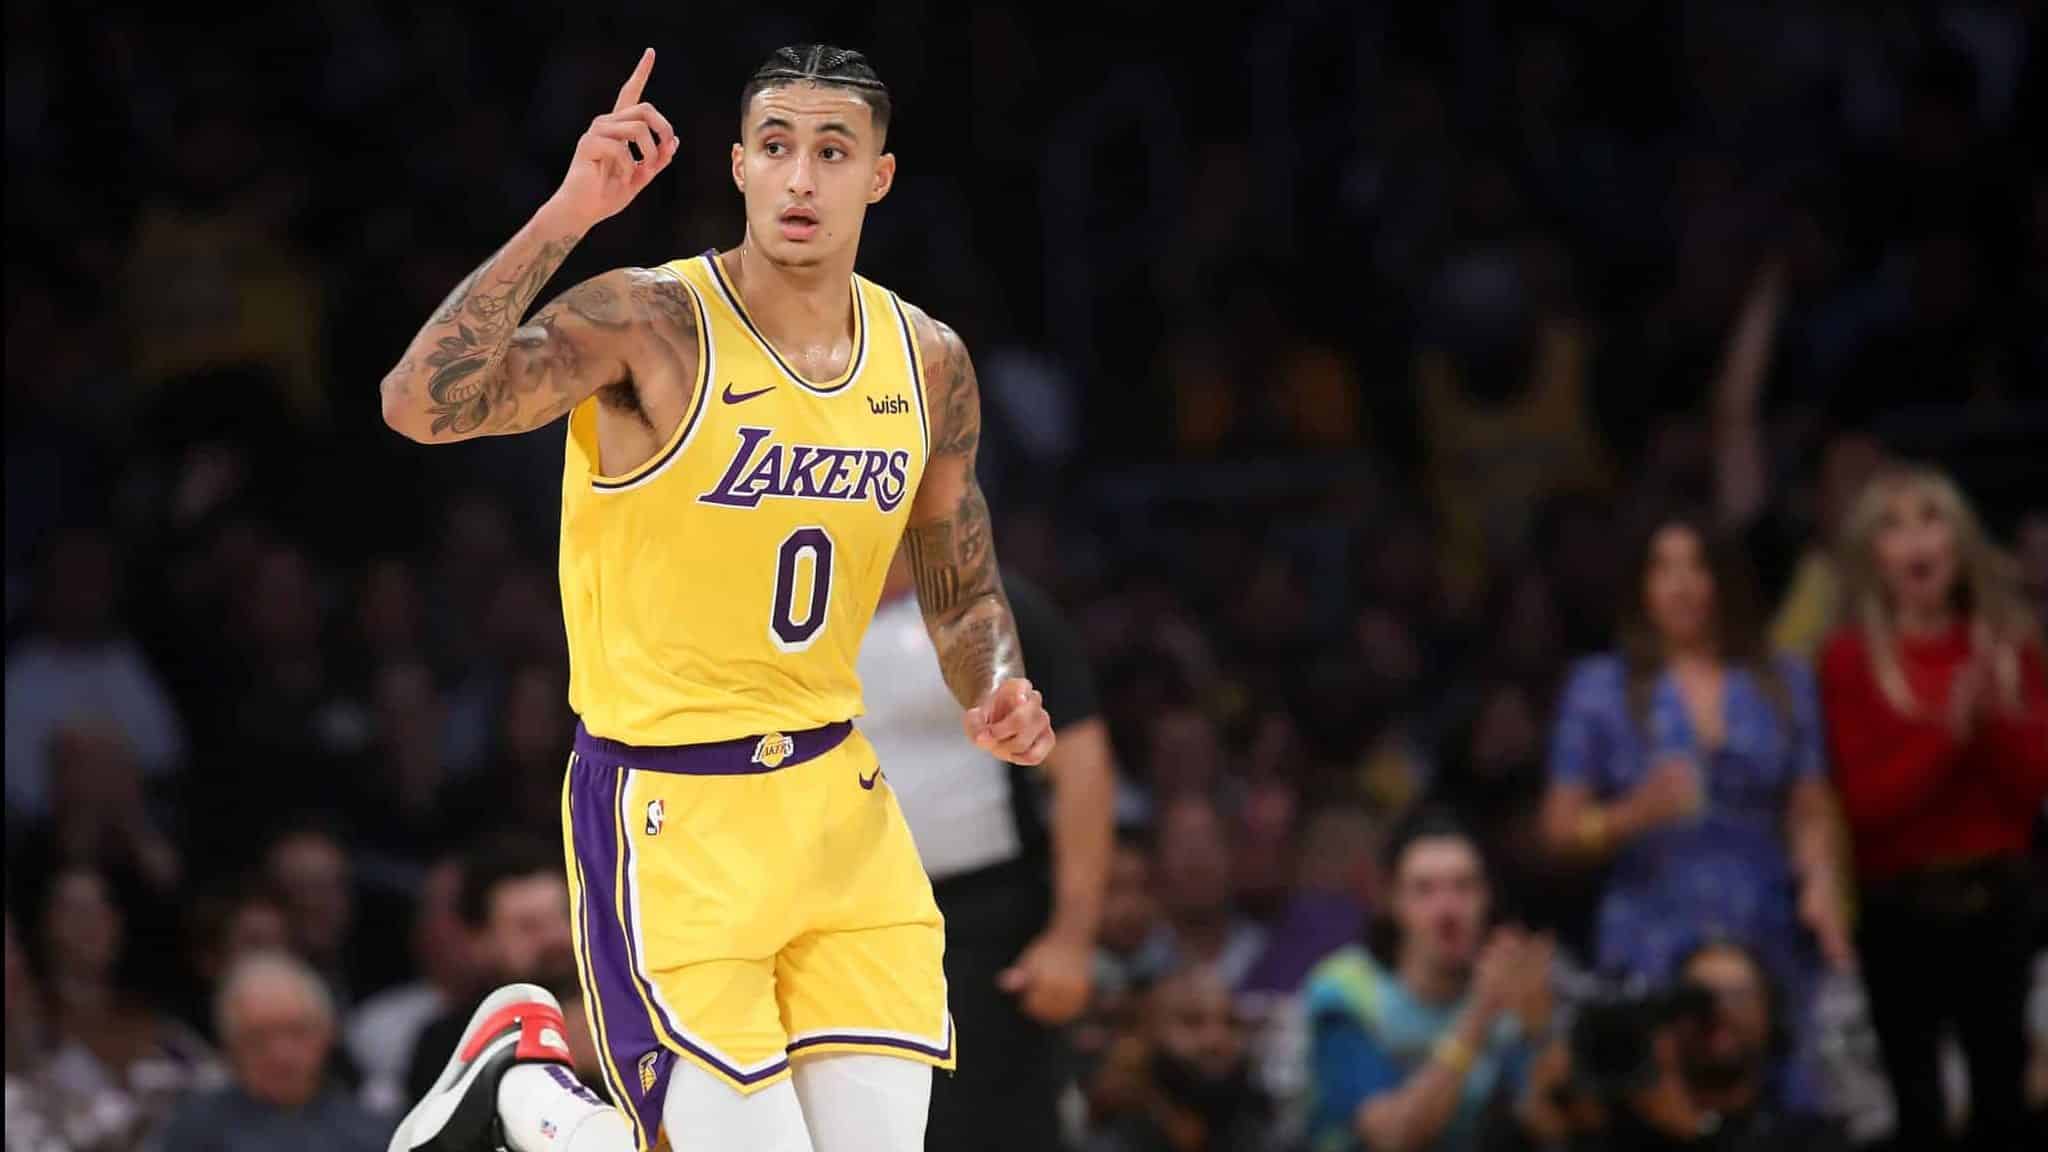 LOS ANGELES, CALIFORNIA - NOVEMBER 19: Kyle Kuzma #0 of the Los Angeles Lakers reacts after making a three point shot during the first half of a game against the Oklahoma City Thunder at Staples Center on November 19, 2019 in Los Angeles, California. NOTE TO USER: User expressly acknowledges and agrees that, by downloading and/or using this photograph, user is consenting to the terms and conditions of the Getty Images License Agreement